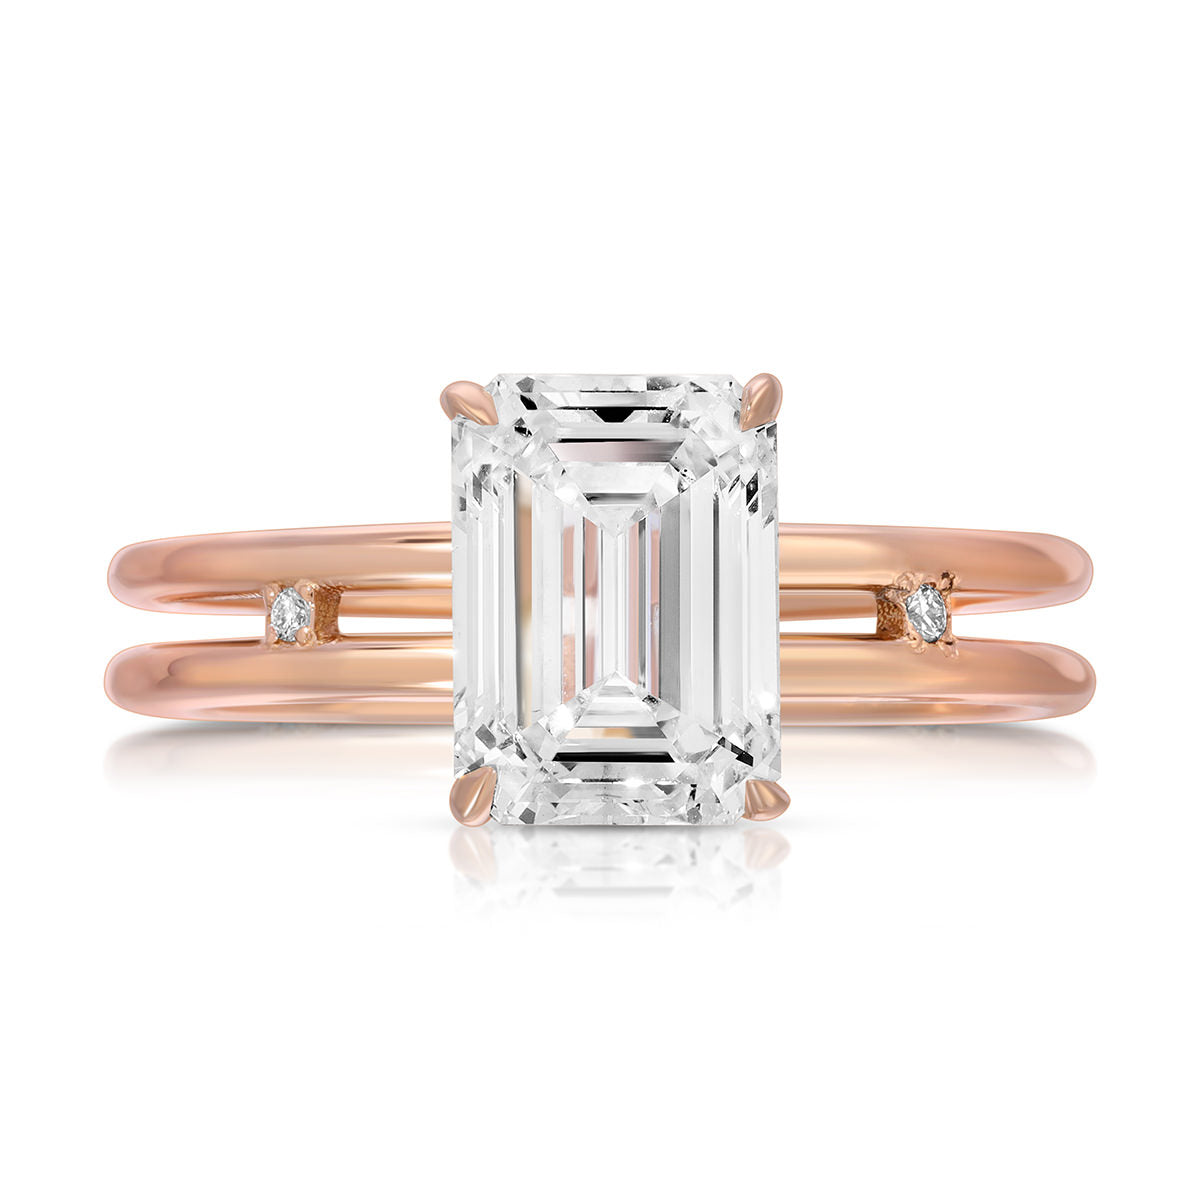 Parallels Emerald Engagement Ring in Rose Gold